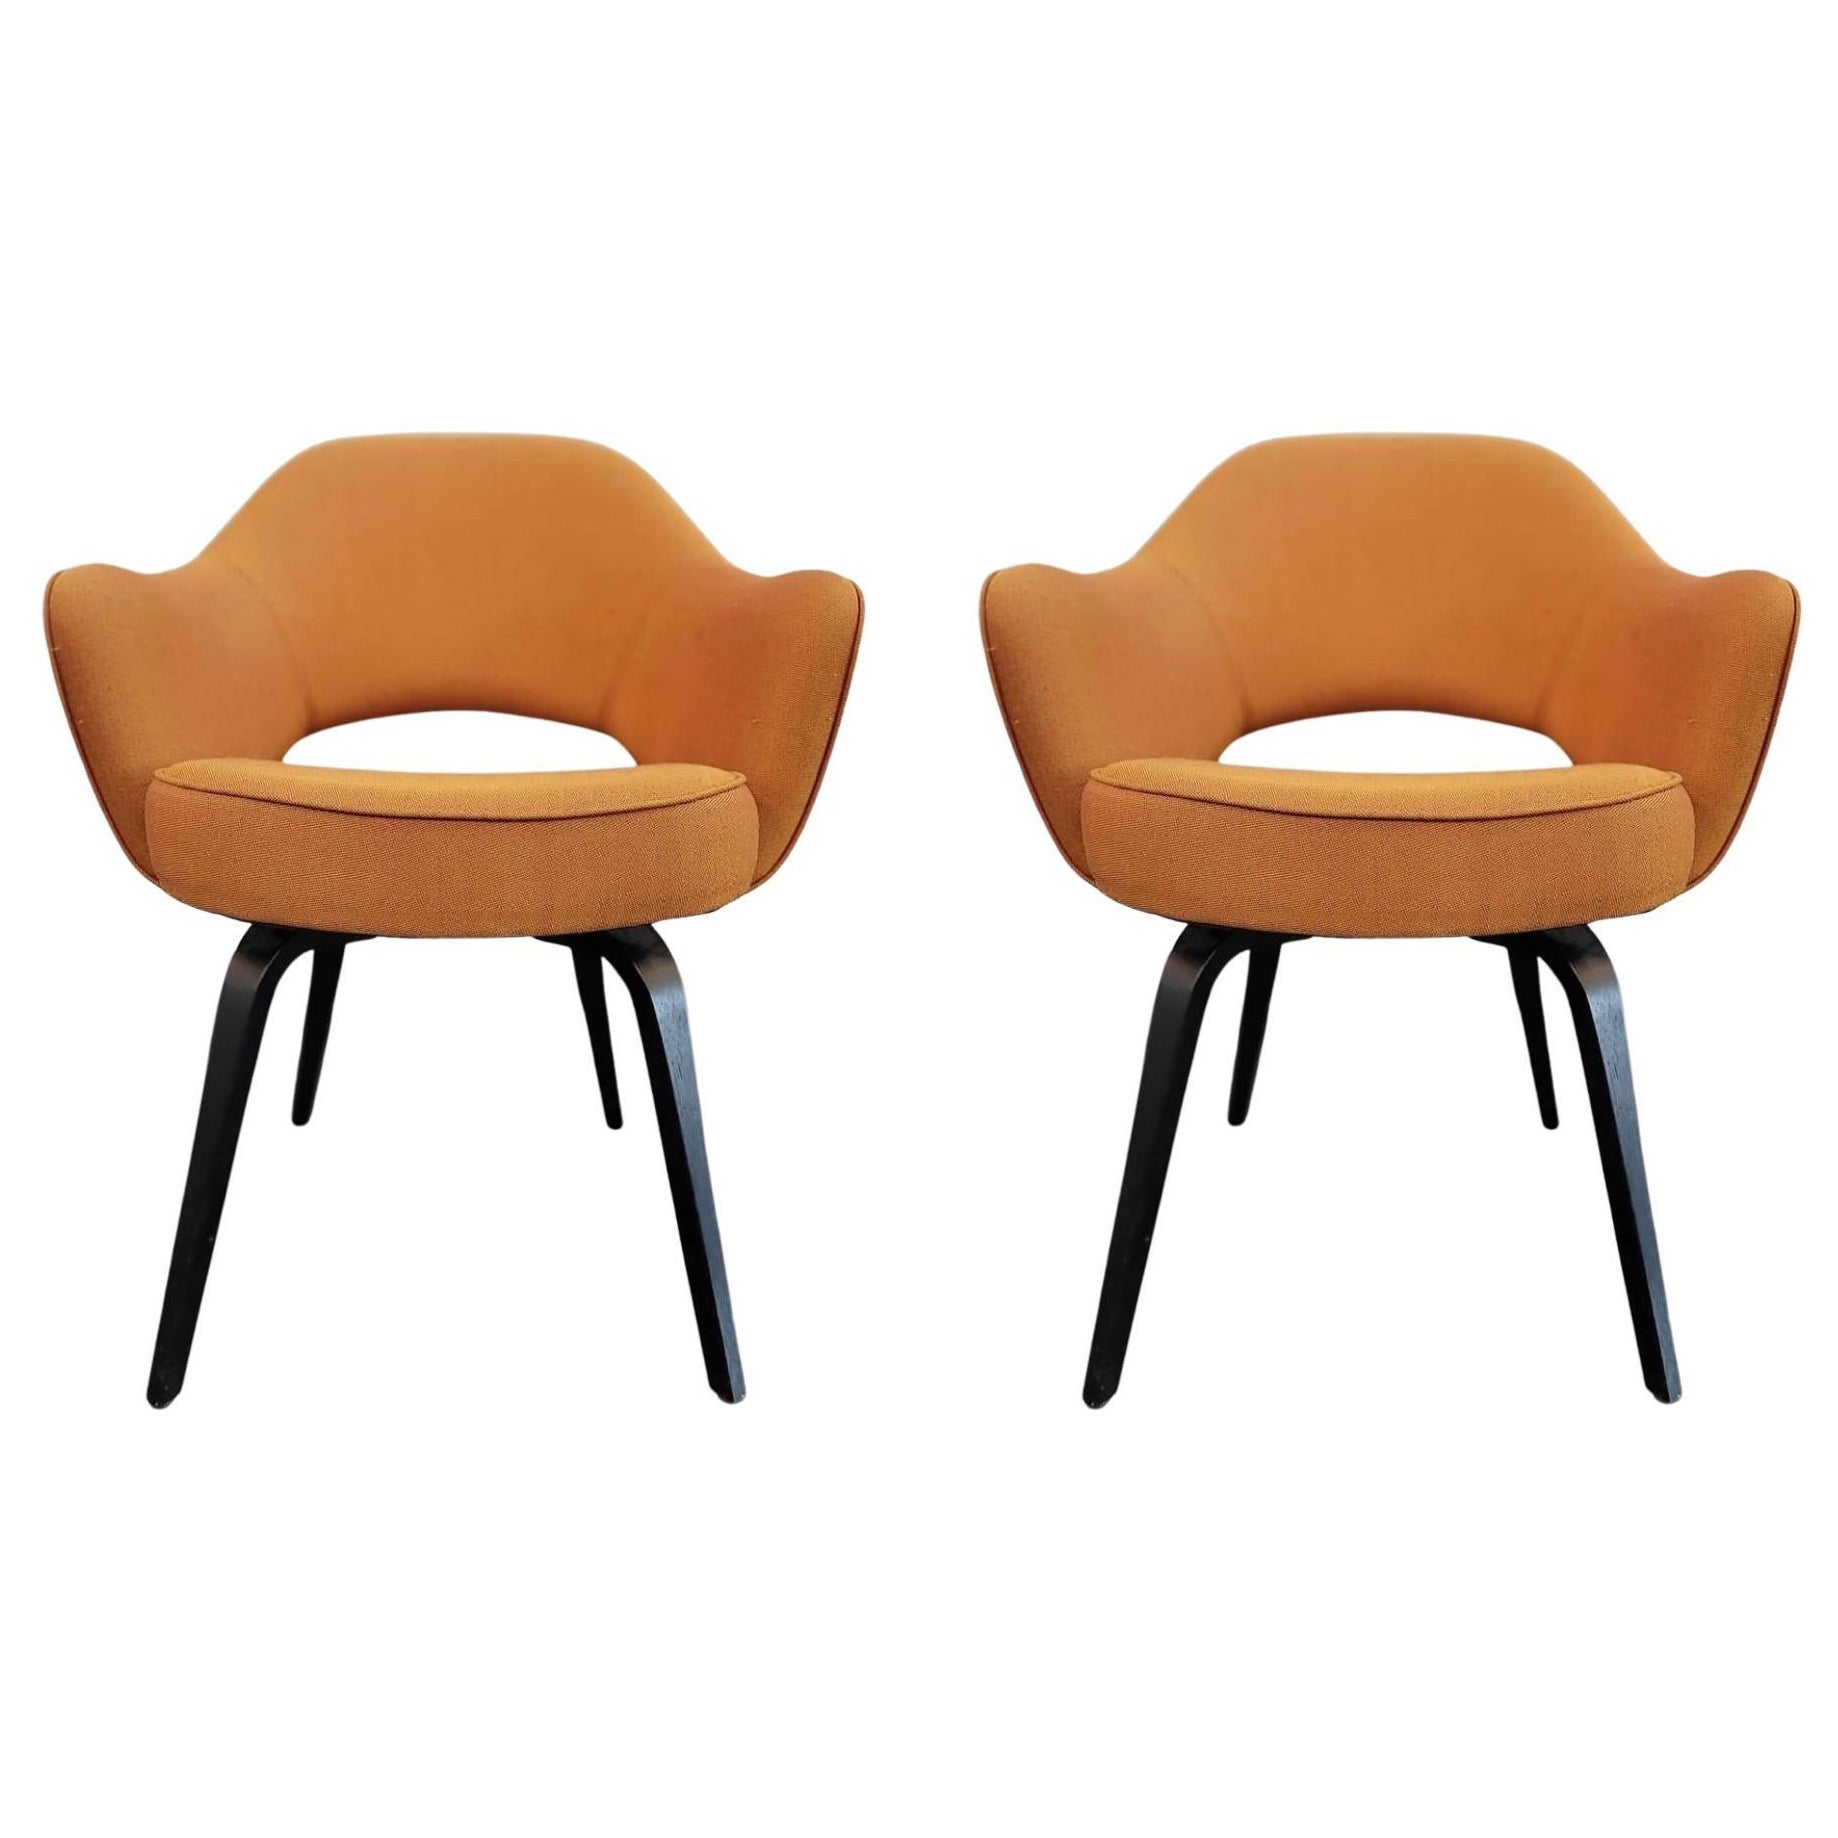 Saarinen for Knoll Executive Chairs, a Pair For Sale